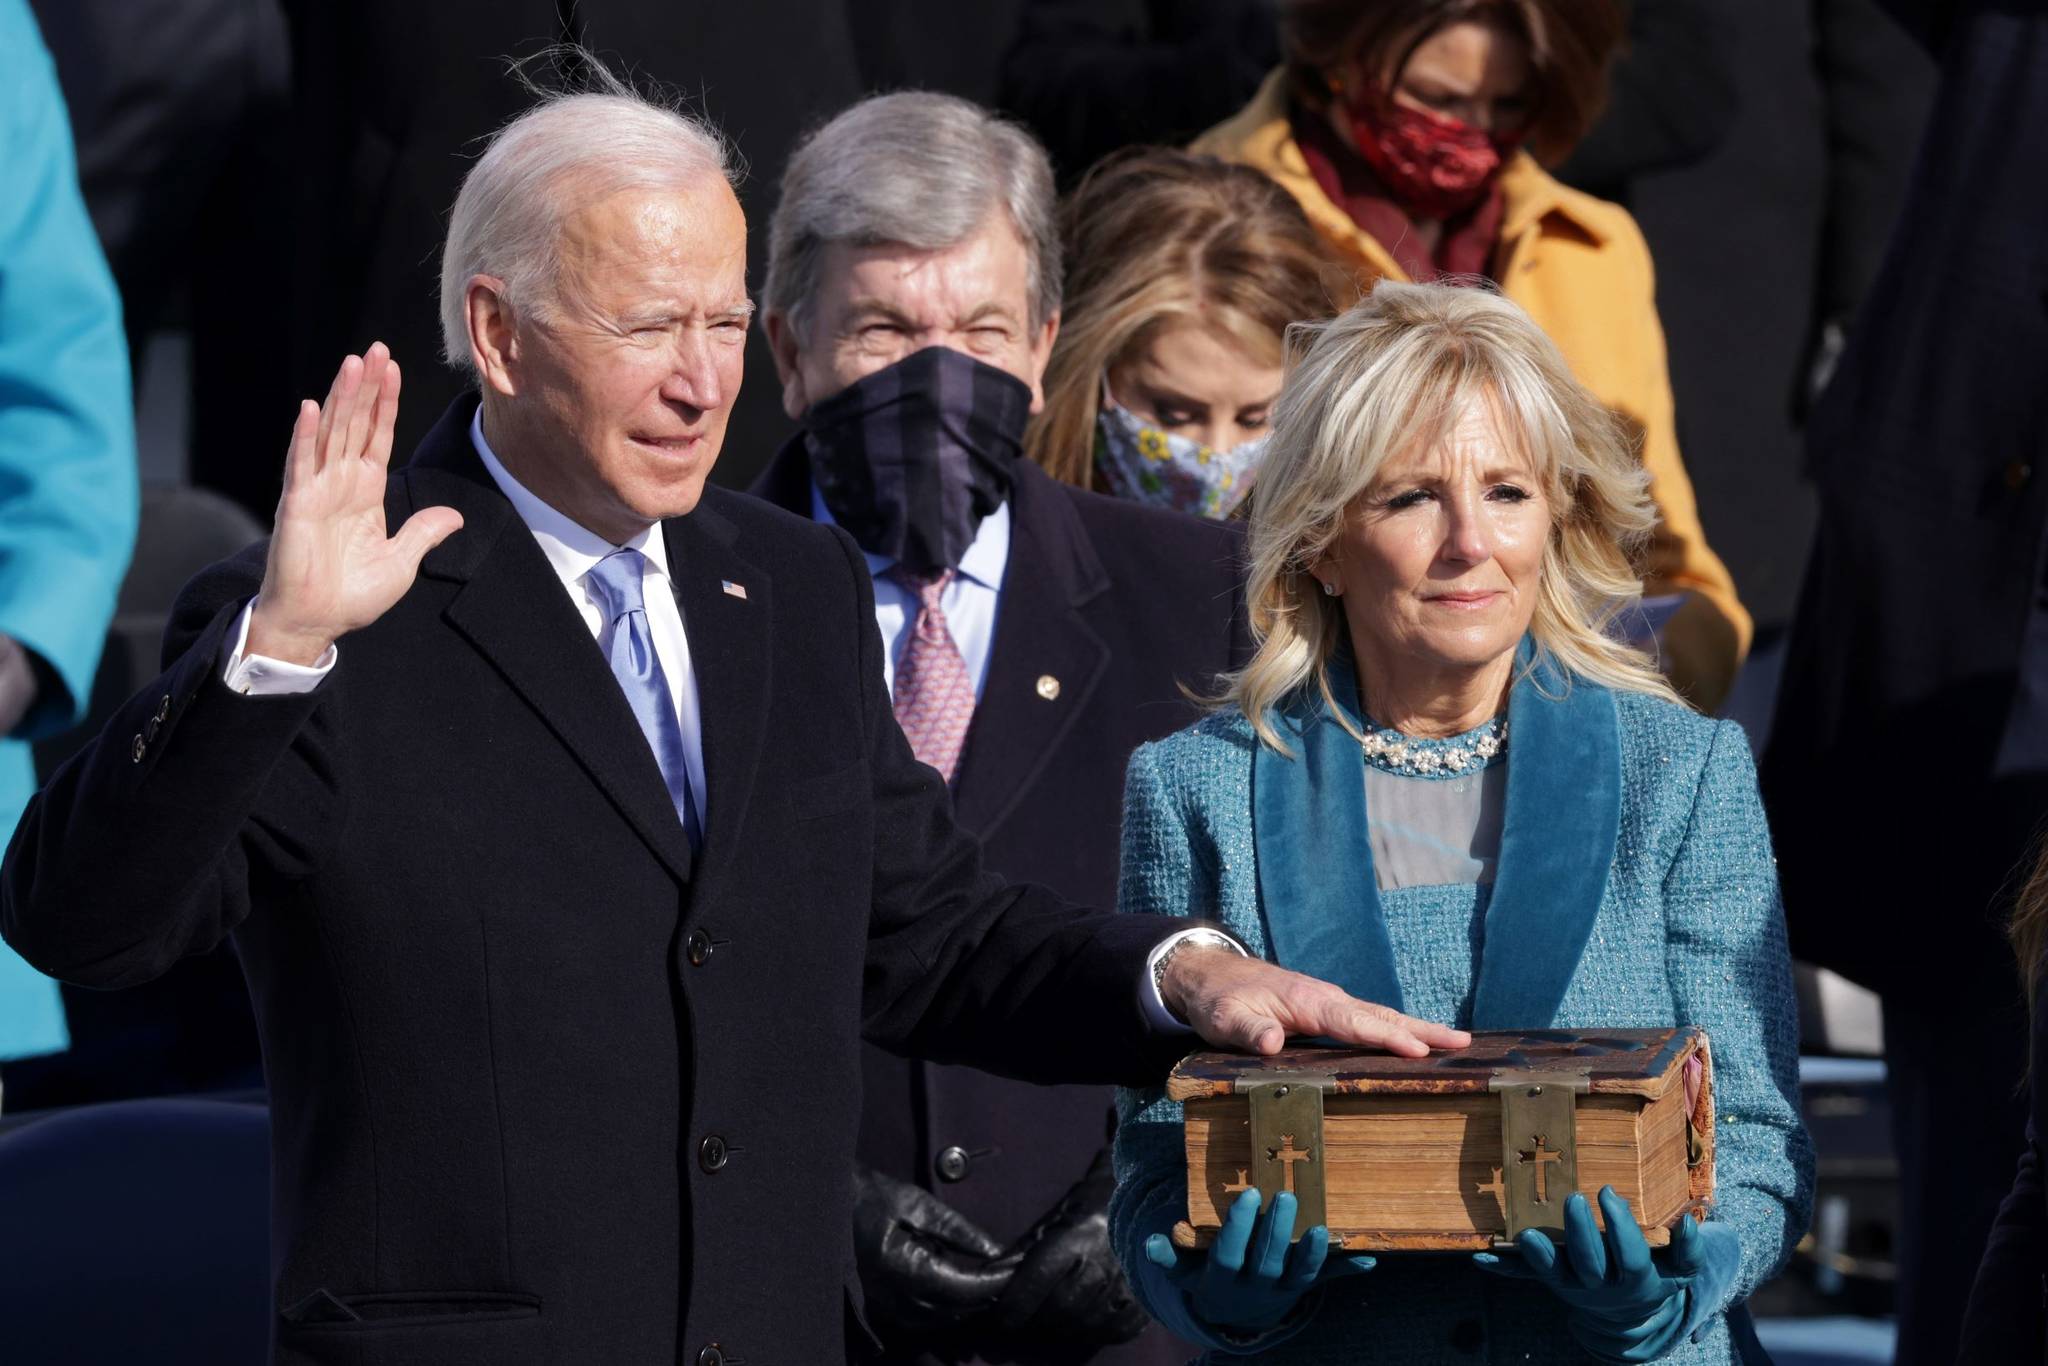 Alex Wong/Getty Images 
Joe Biden is sworn in as president during his inauguration on the West Front of the U.S. Capitol on Wednesday in Washington, D.C., to become the 46th president of the United States.